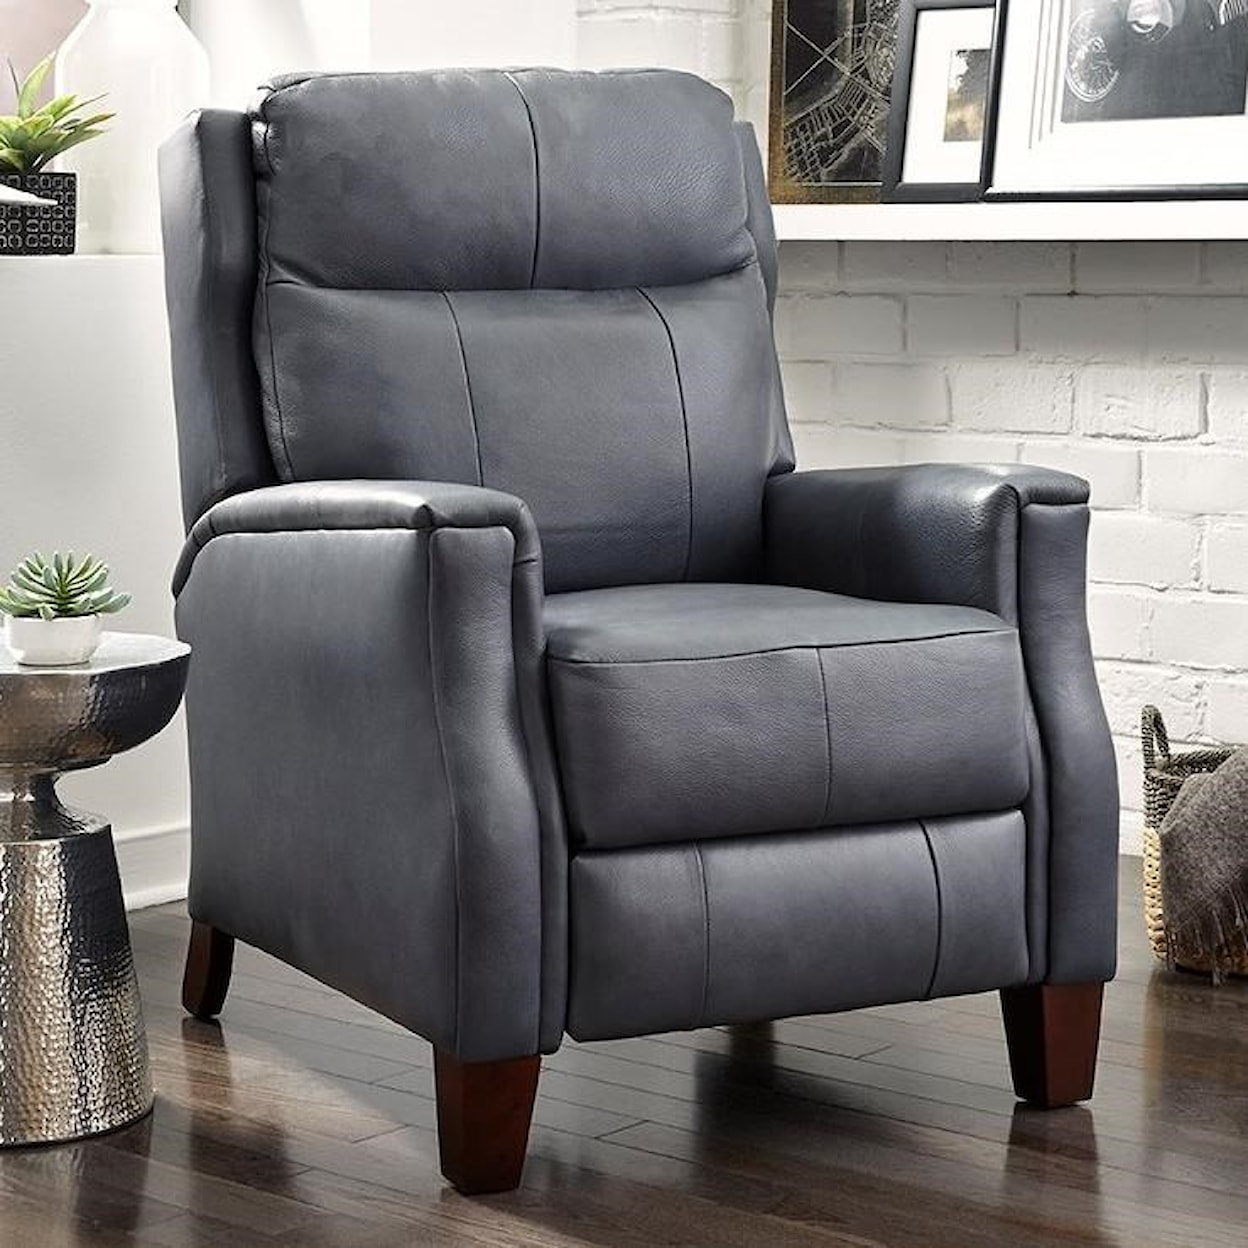 Southern Motion Bowie High Leg Recliner